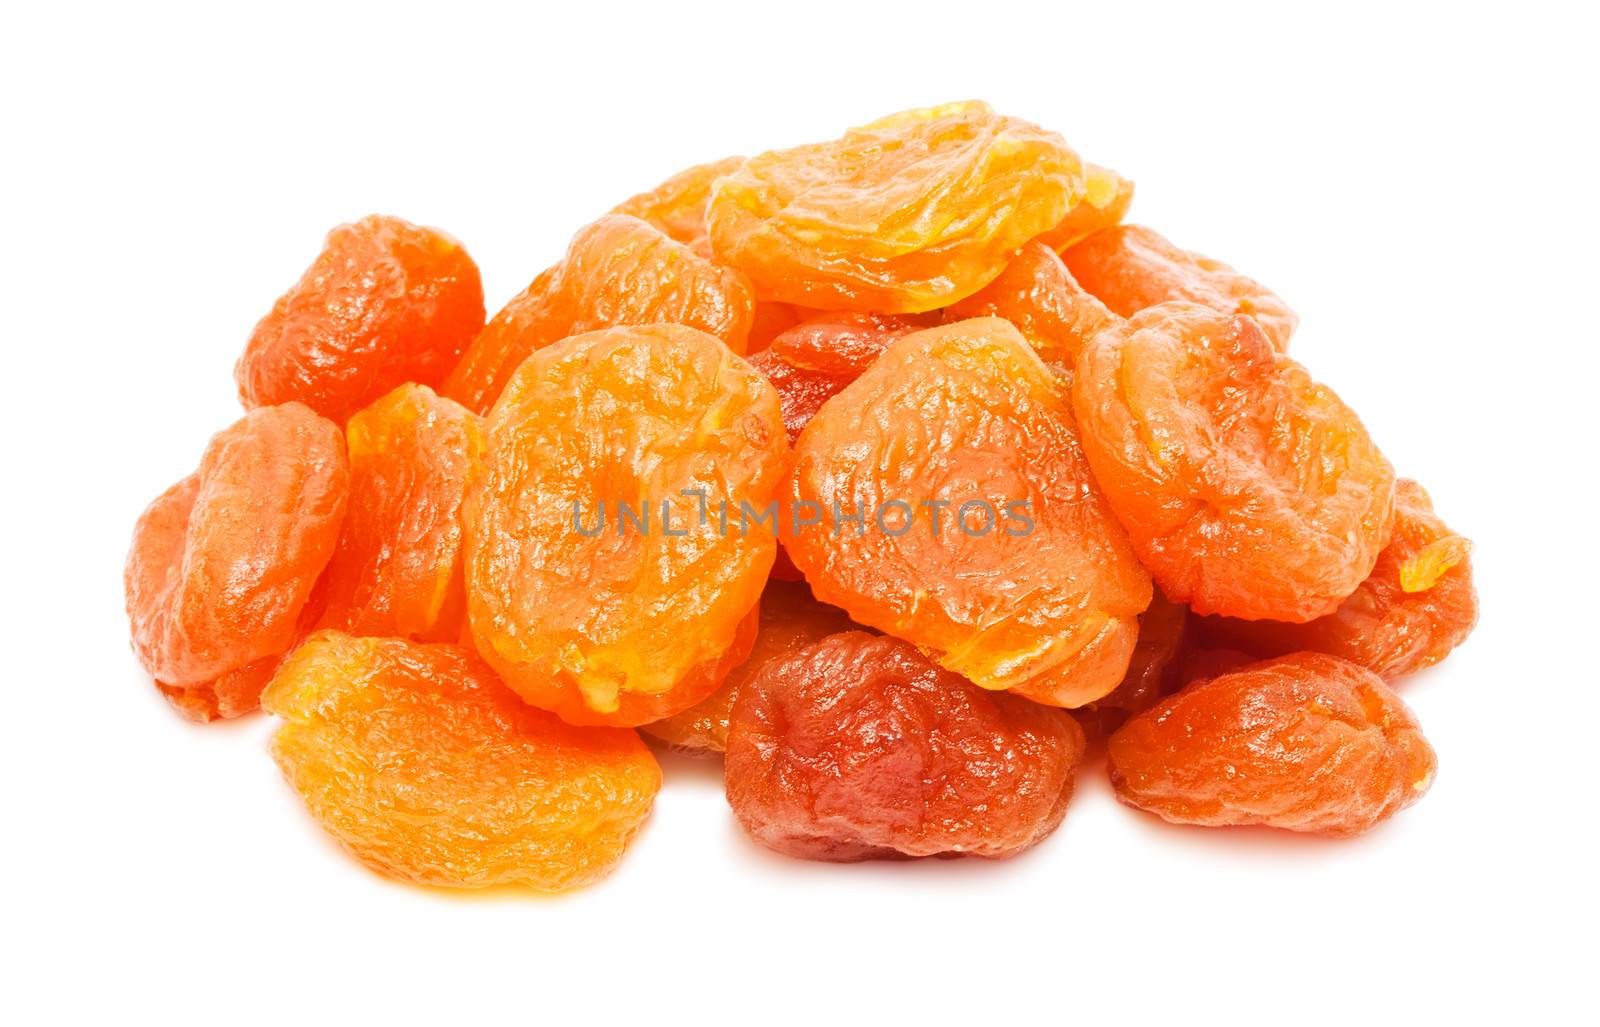 Tasty dried apricots isolated on white background